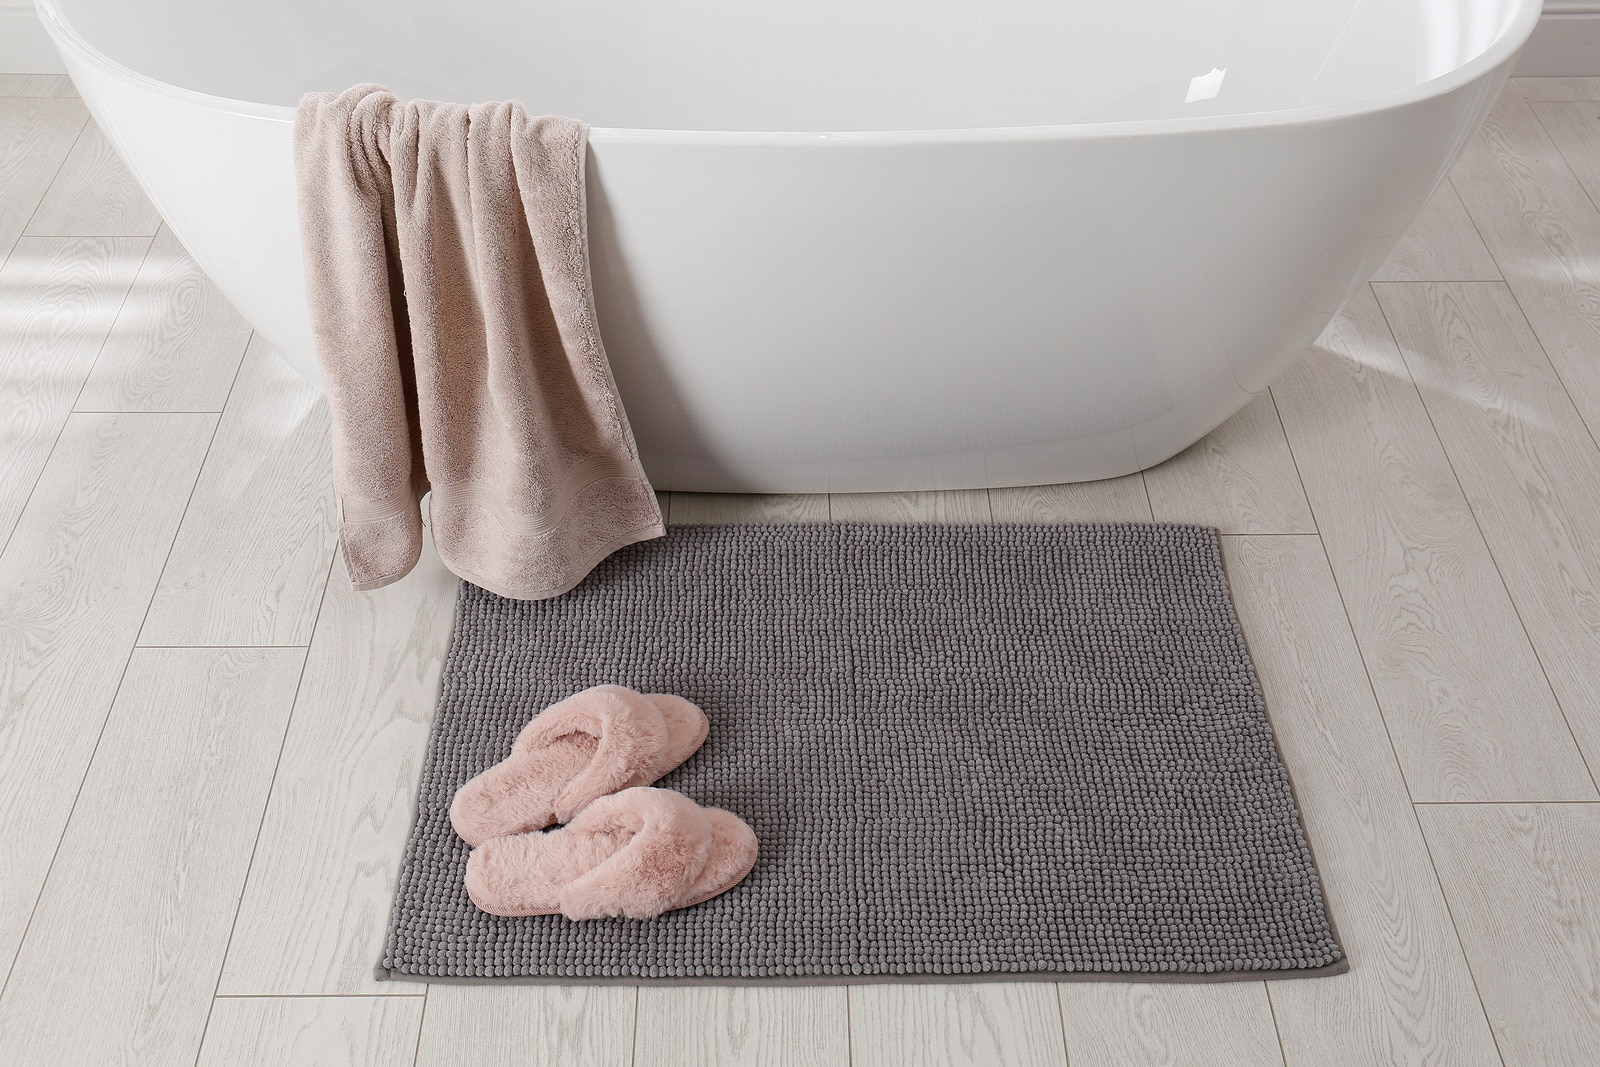 Bathroom Rugs  The Complete Guide Before You Buy